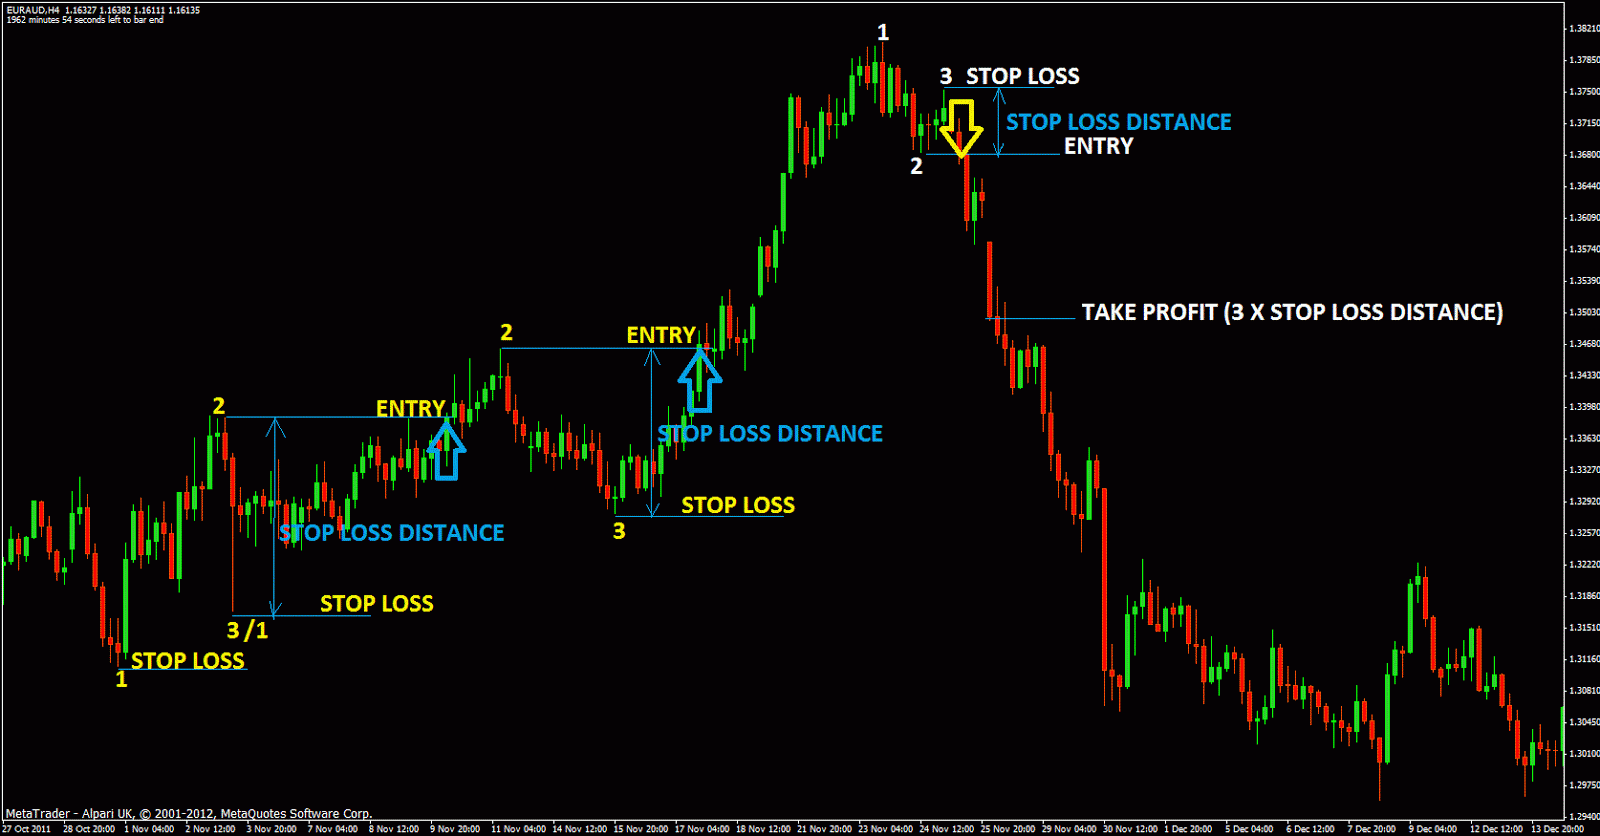 Real Time Forex Trading Charts